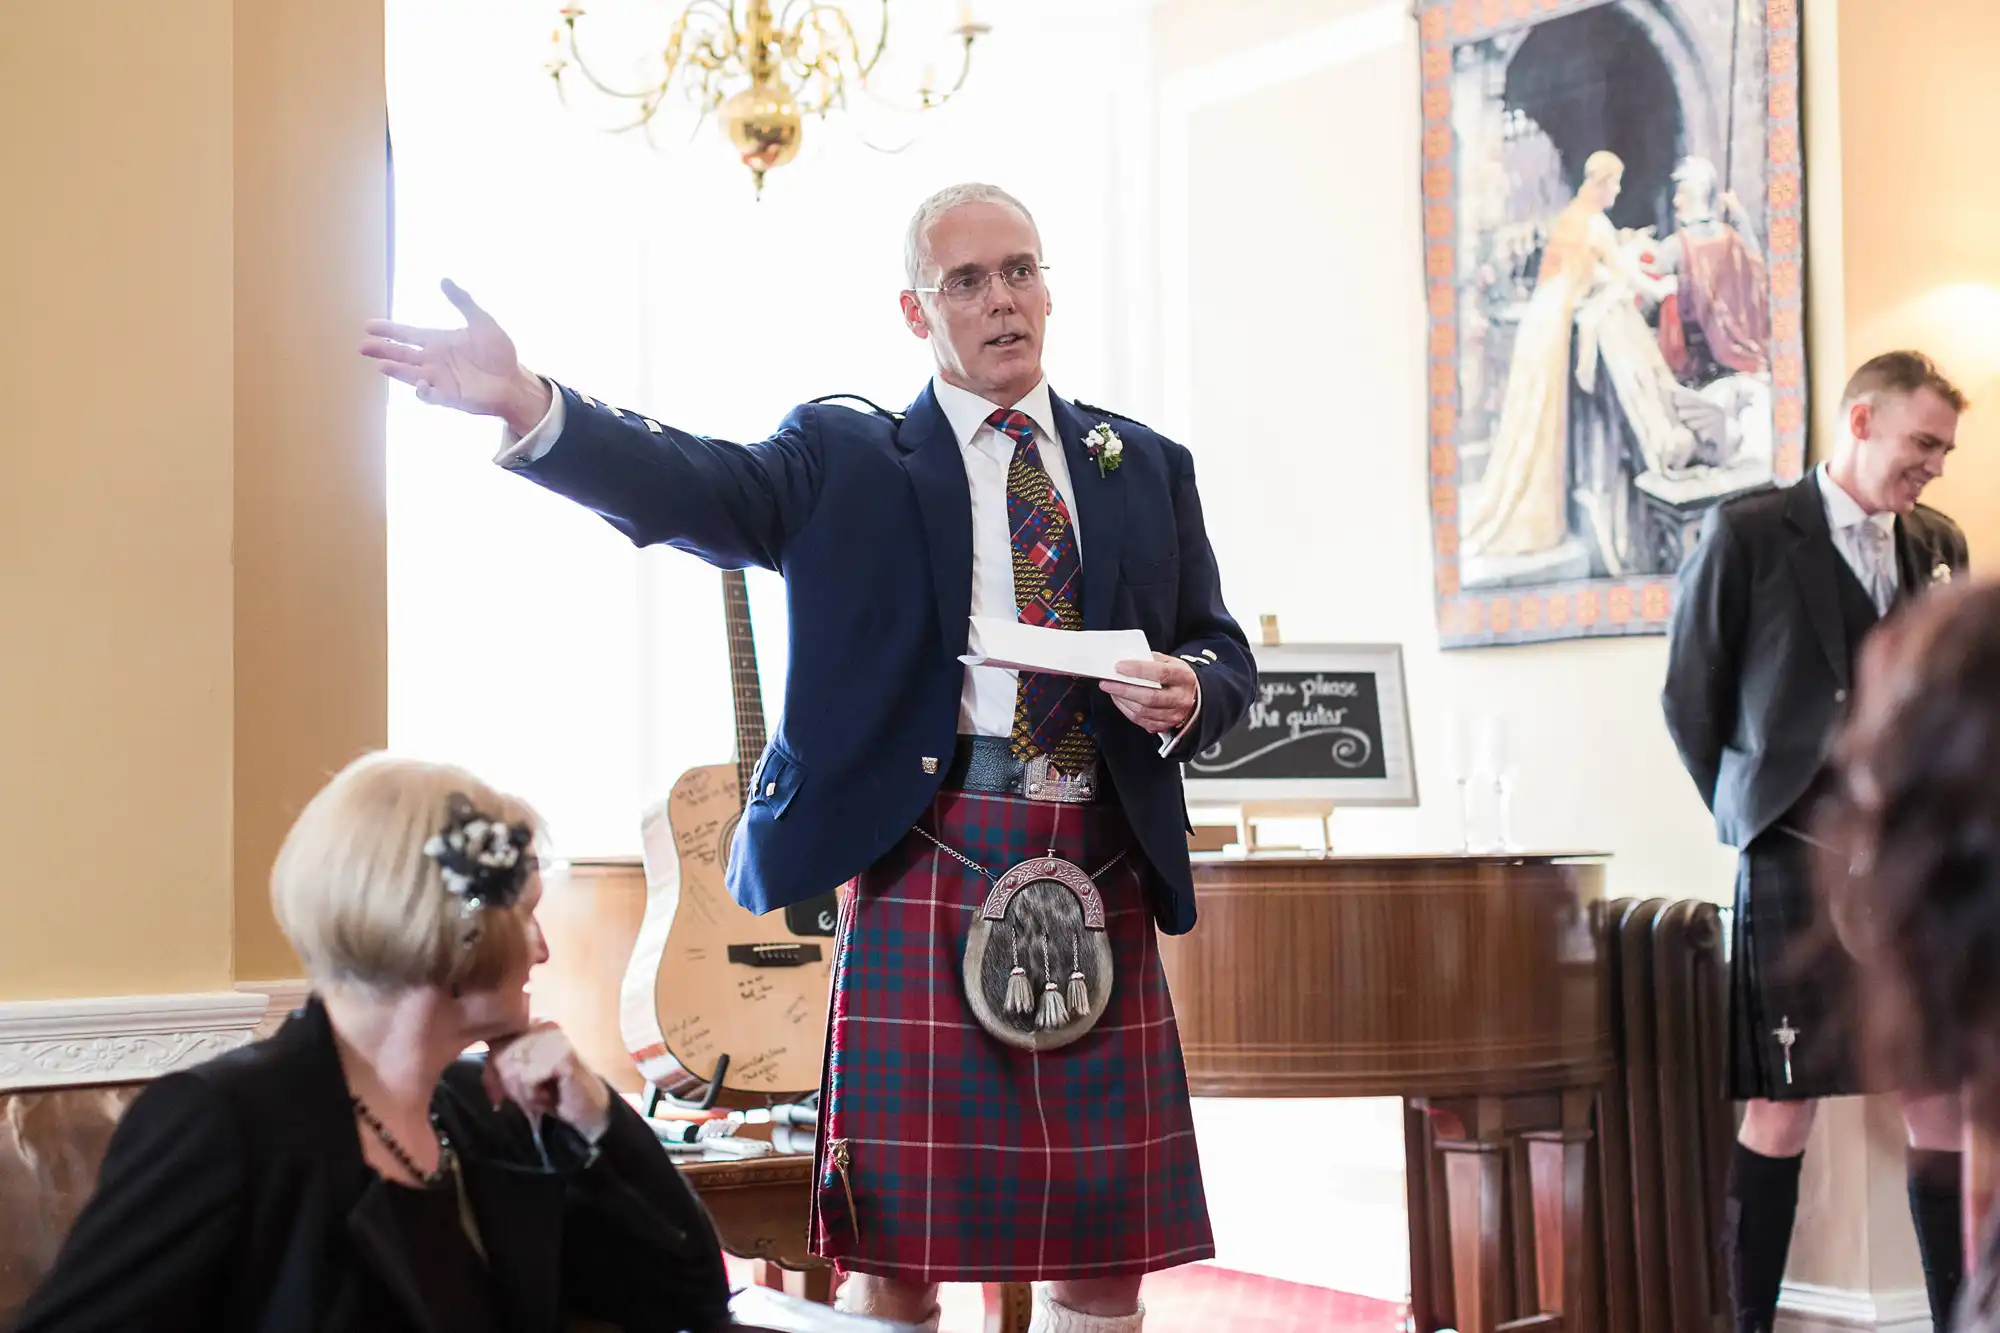 A man in a kilt and formal jacket gestures while speaking in front of a group of seated people in an elegant room.